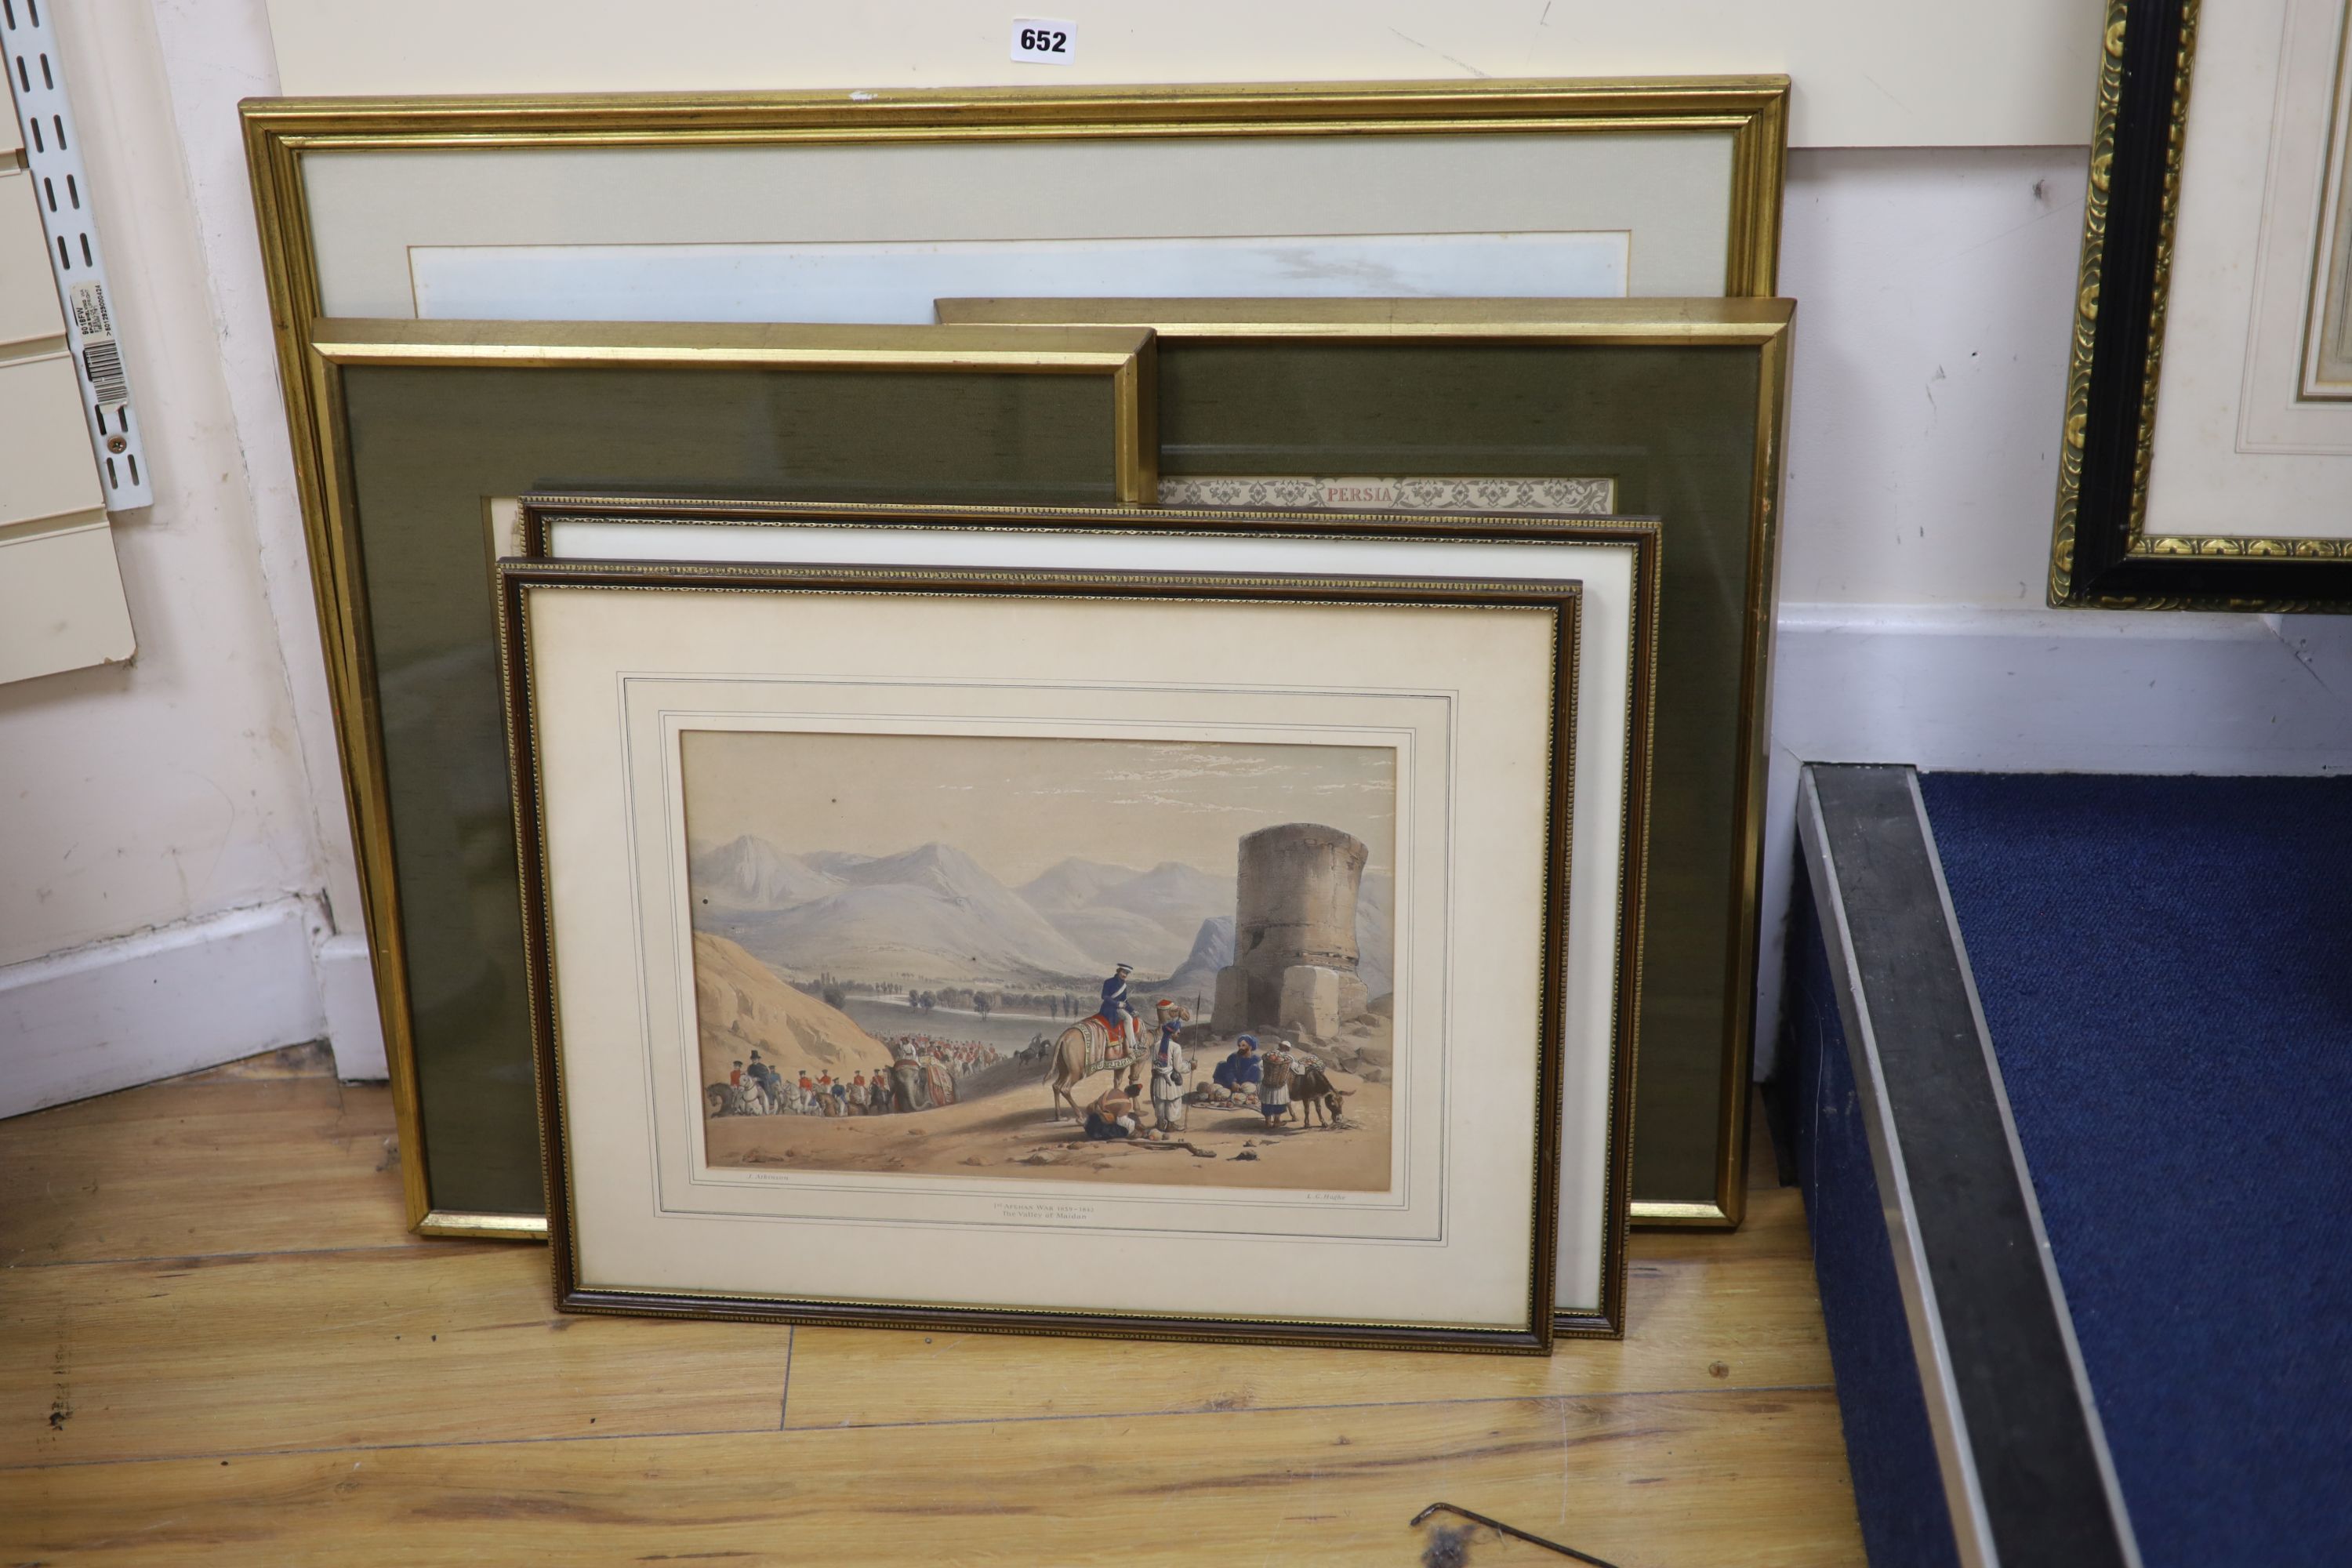 J. Atkinson, two coloured lithographs, The Encampment at Dadur and The Valley of Maidan, Afghan War 1839, two maps of Egypt and Persia and colour print After Thomas Daniel